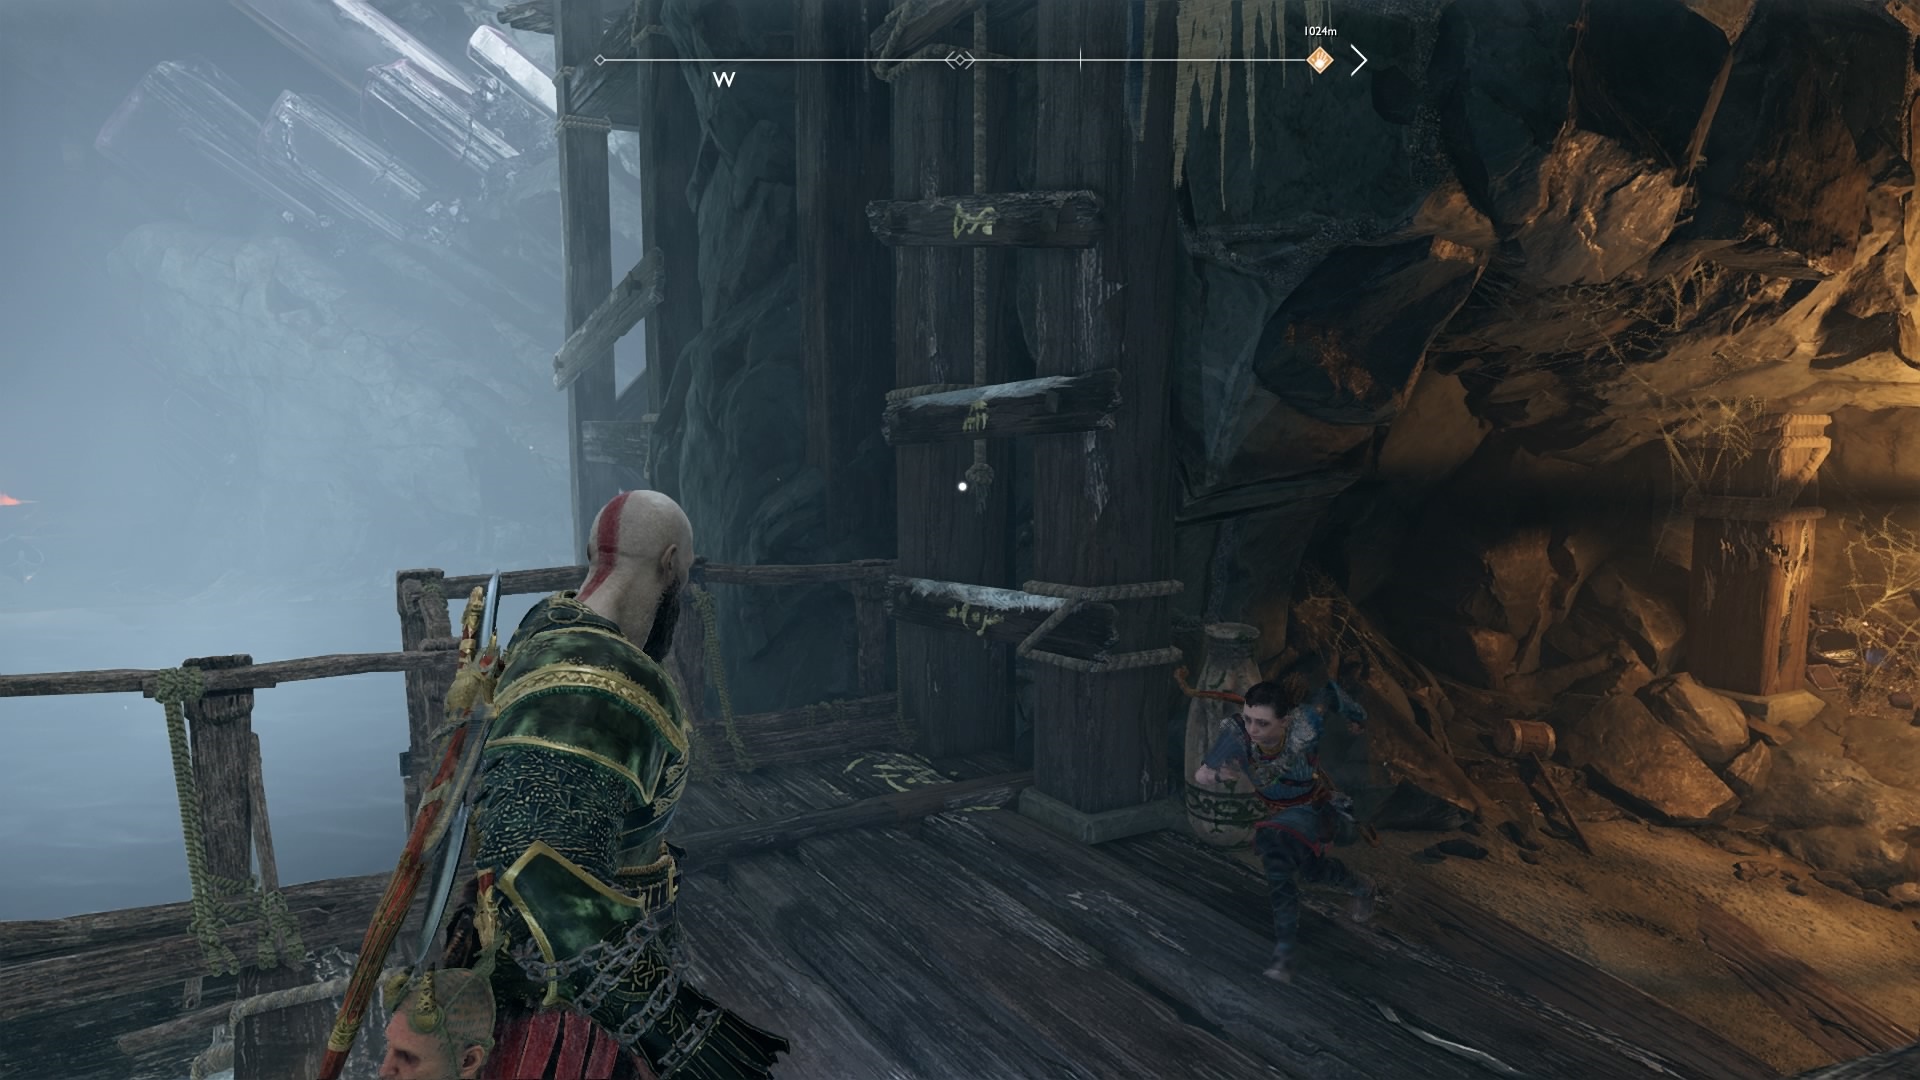 god of war treasure map collectibles guide finder's fee 2